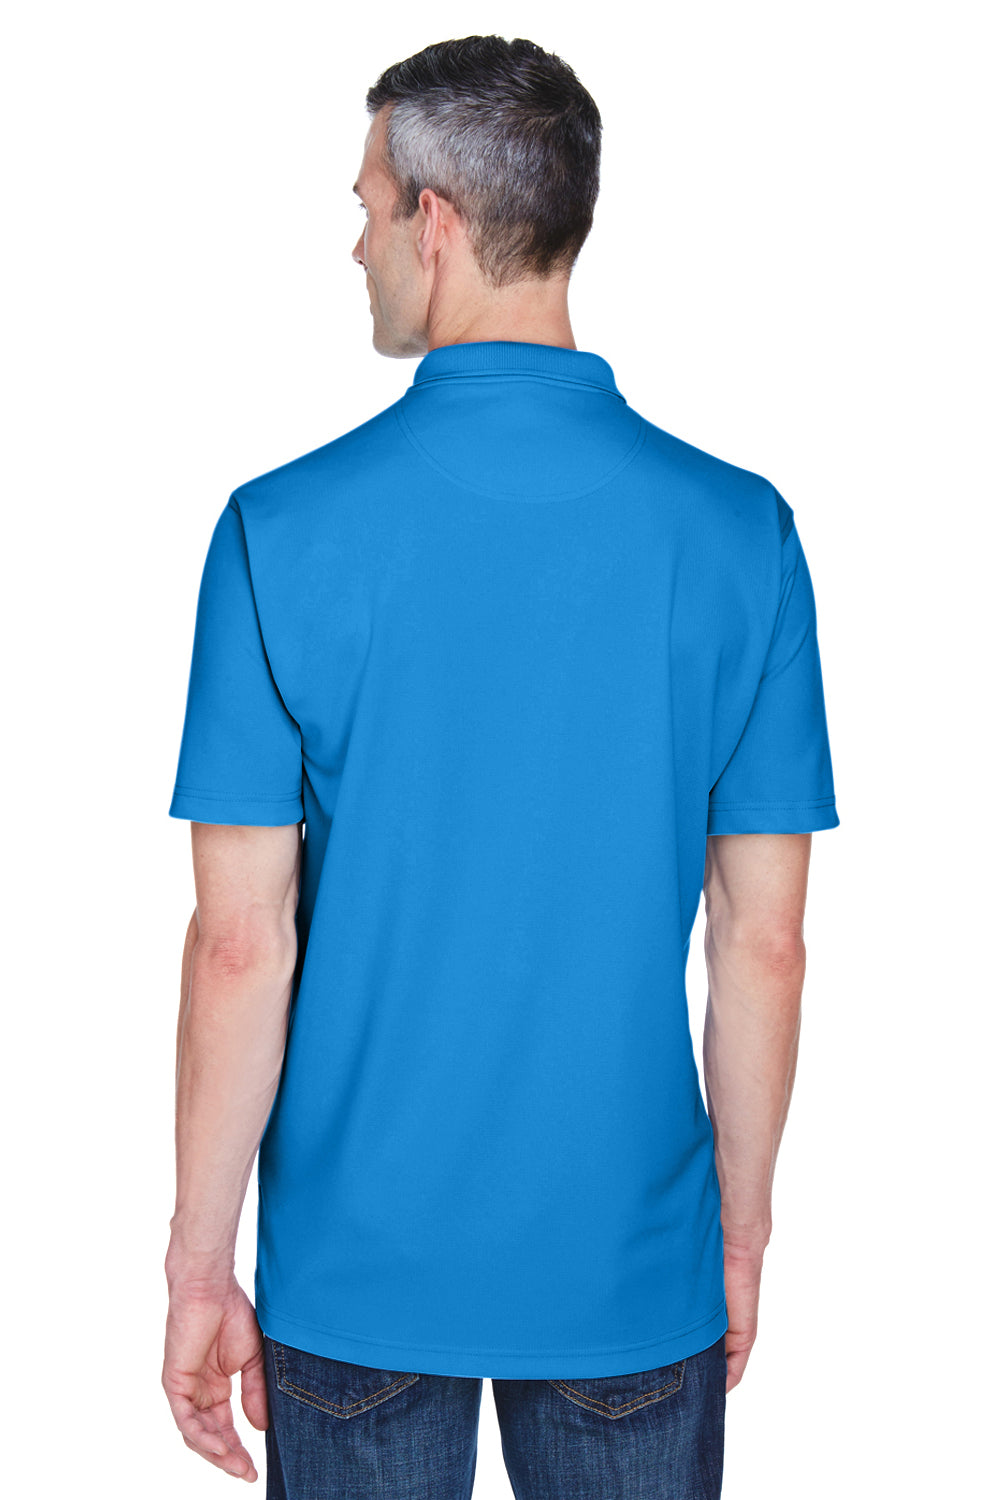 UltraClub 8445 Mens Cool & Dry Performance Moisture Wicking Short Sleeve Polo Shirt Pacific Blue Back